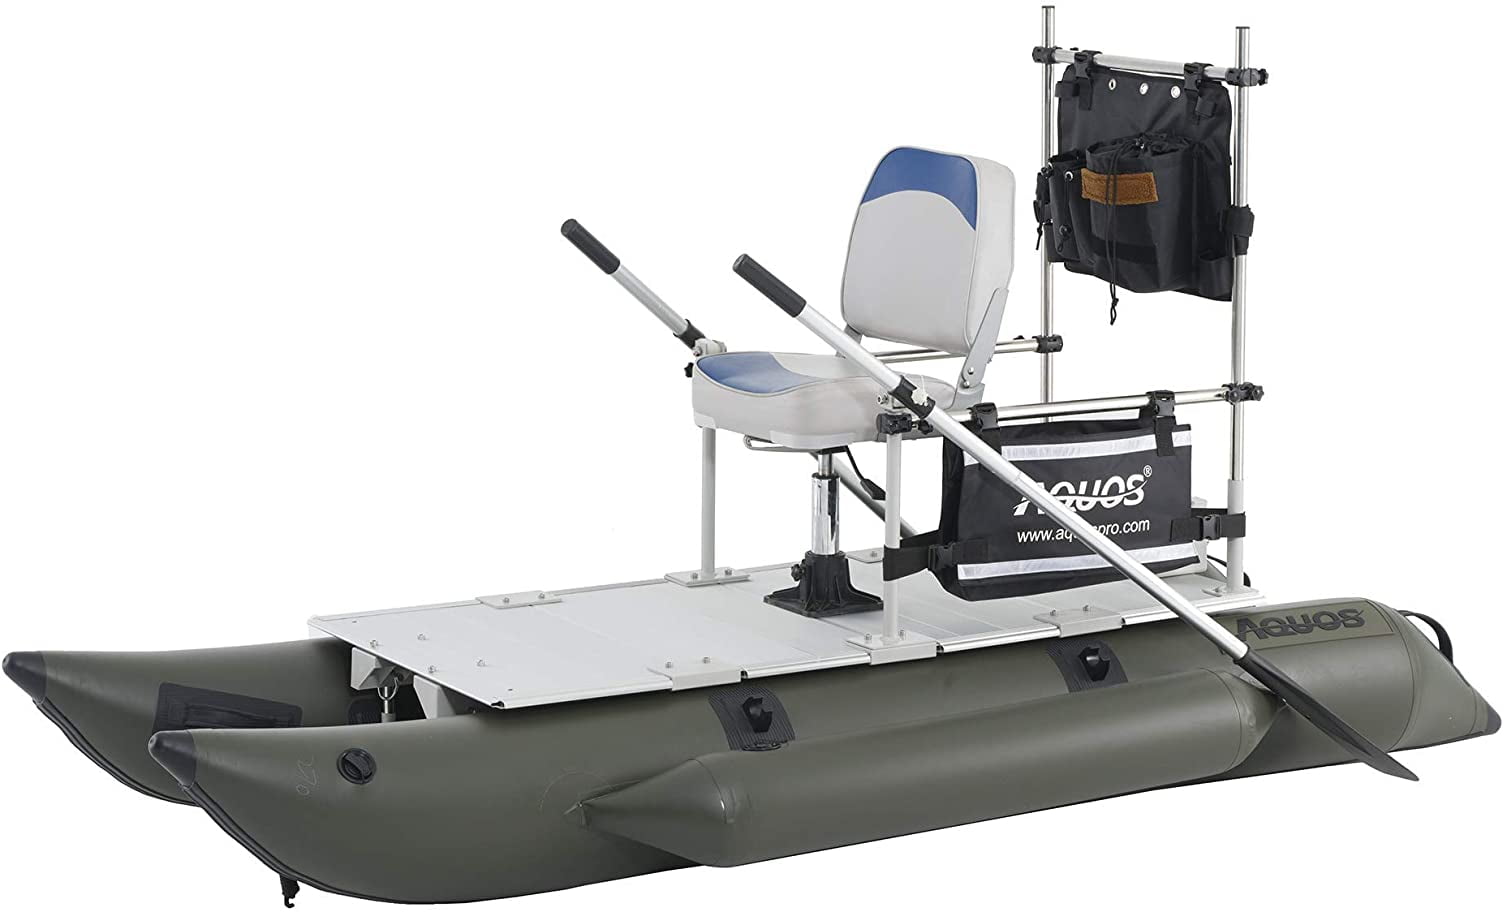 AQUOS Heavy-Duty for Two Series 12.5 ft Inflatable Pontoon Boat